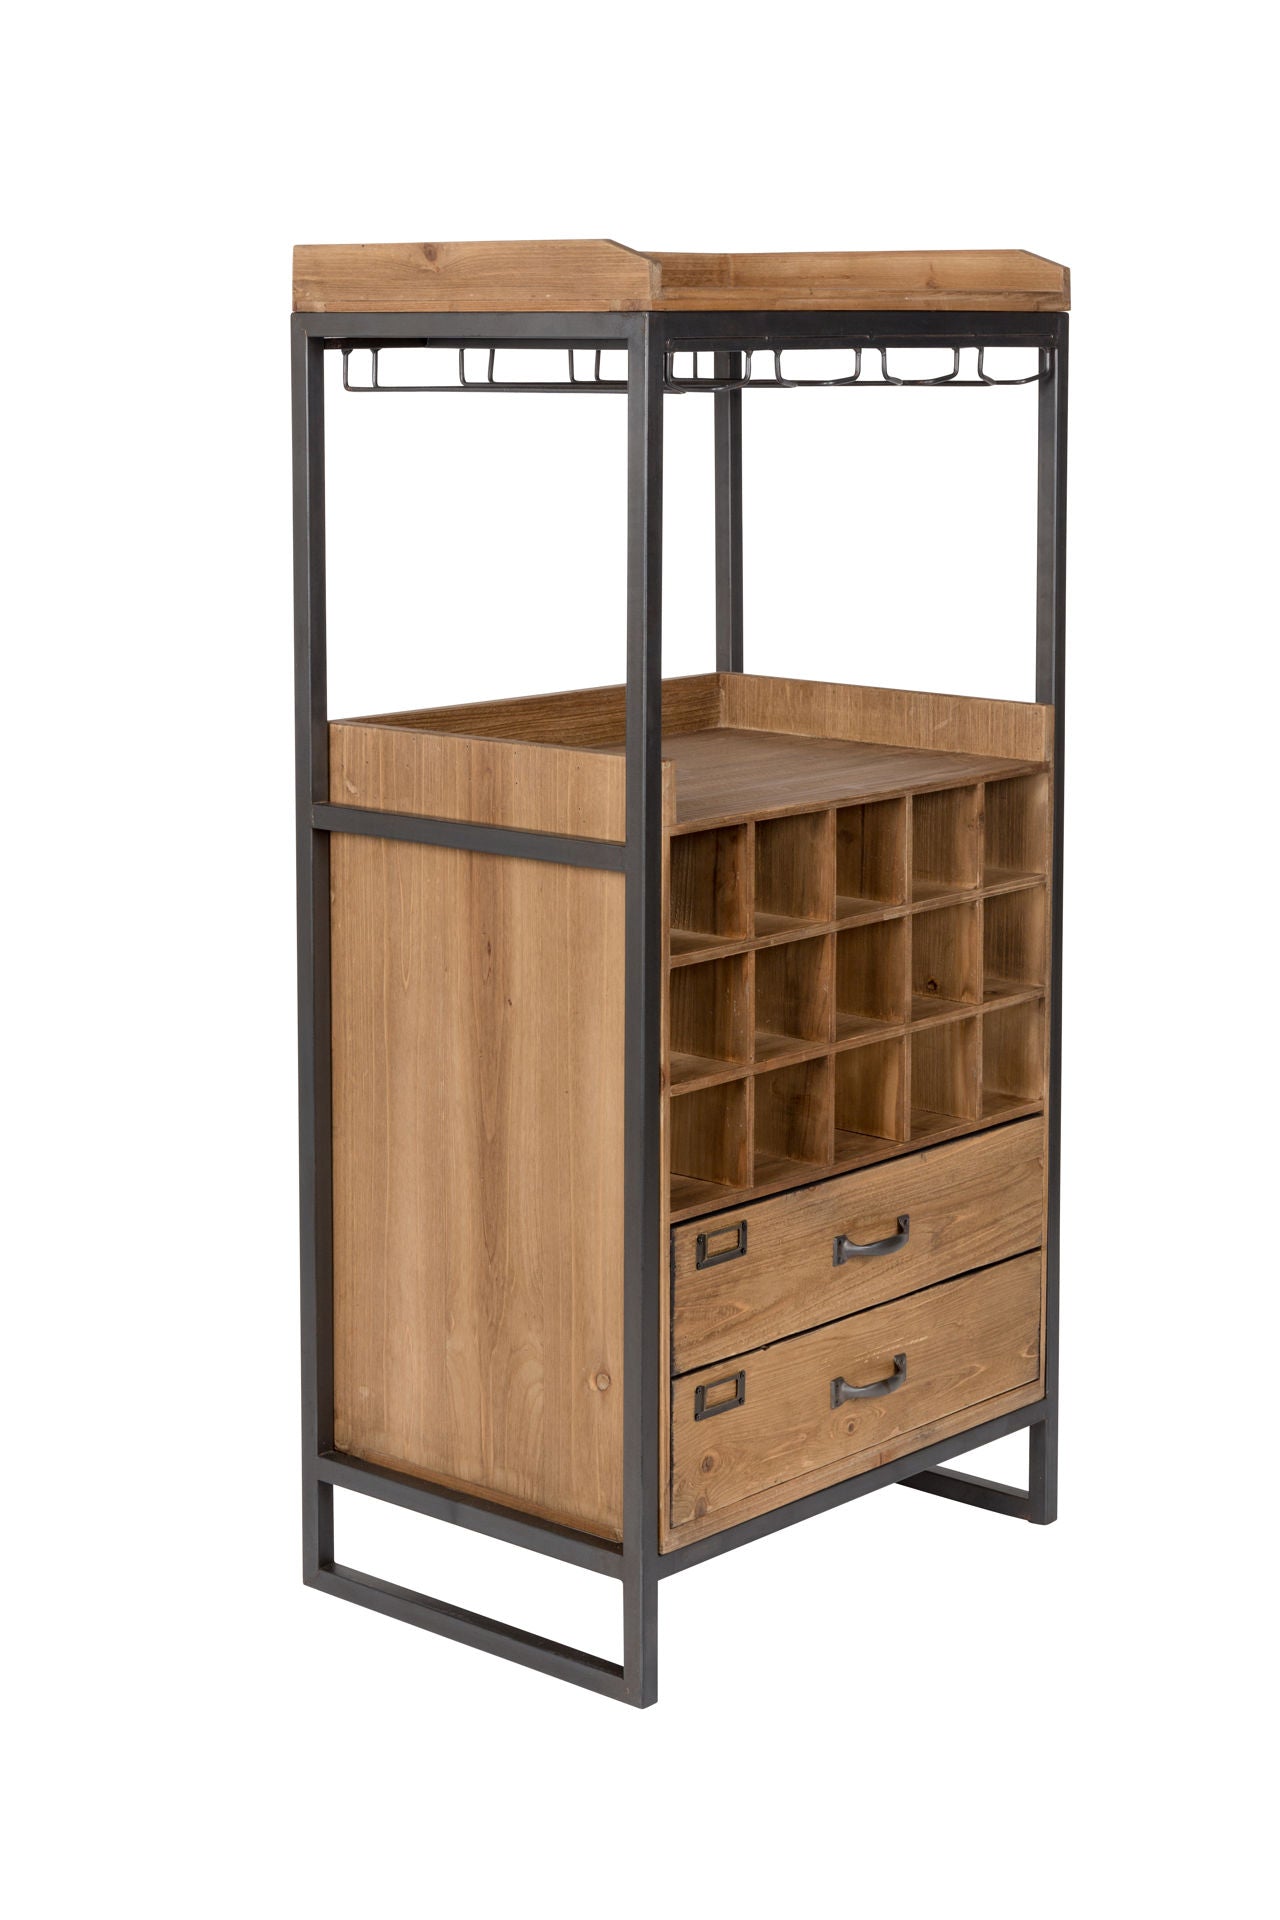 Nancy's Westwood Lakes Cabinet - Industrial - Natural, Gray, Brown - Wood, Mdf, Iron - 38 cm x 56 cm x 112.5 cm